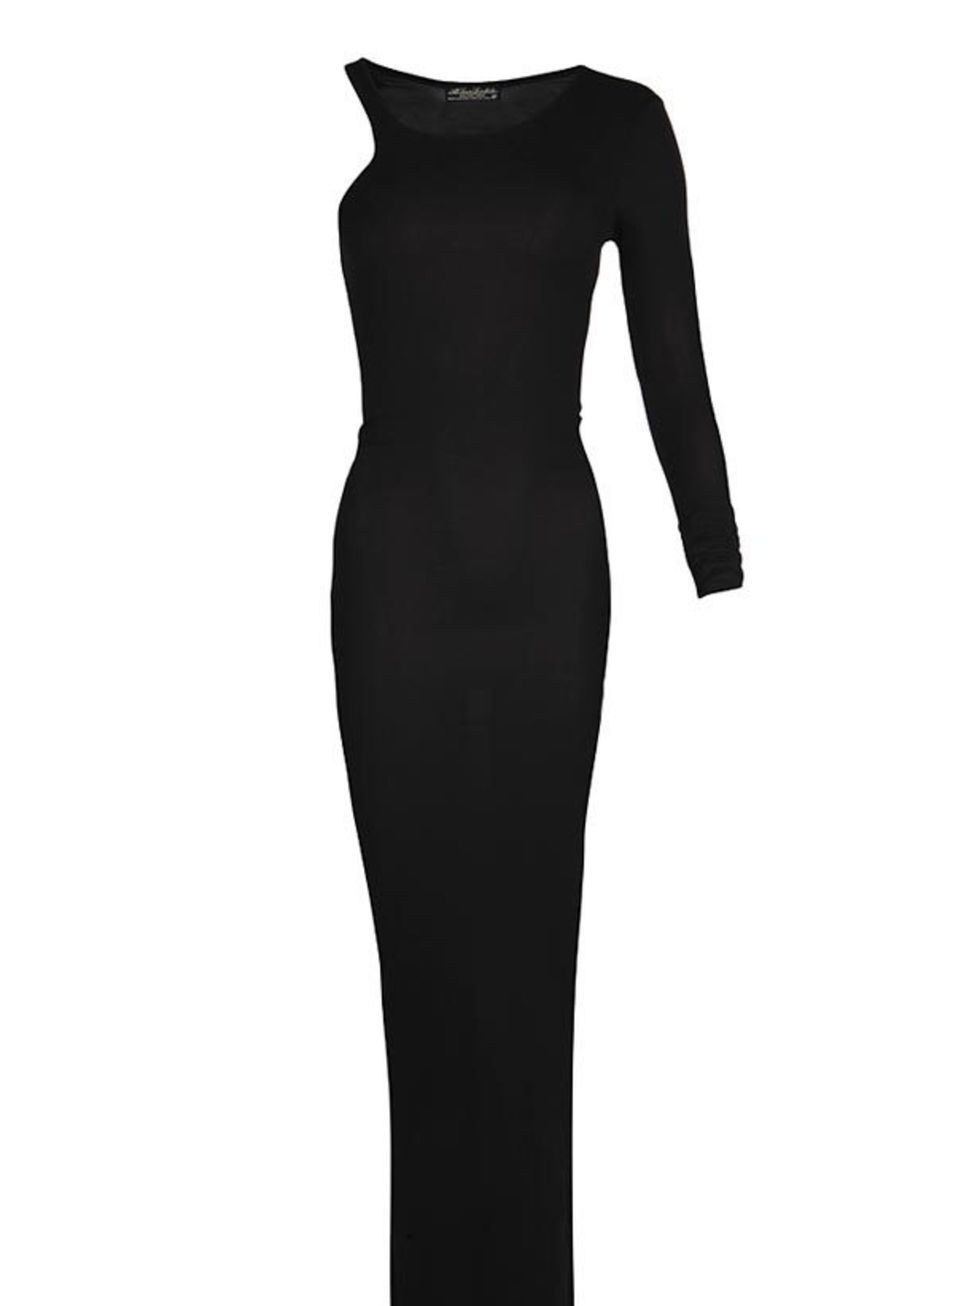 <p> </p><p>The maxi dress is now a certified wardrobe staple and thanks to this Alexander Wang inspired version from All Saints, were about to add another to our collection... <a href="http://www.allsaints.com/women/new/axle-asymetric-maxi-dress/black/wd